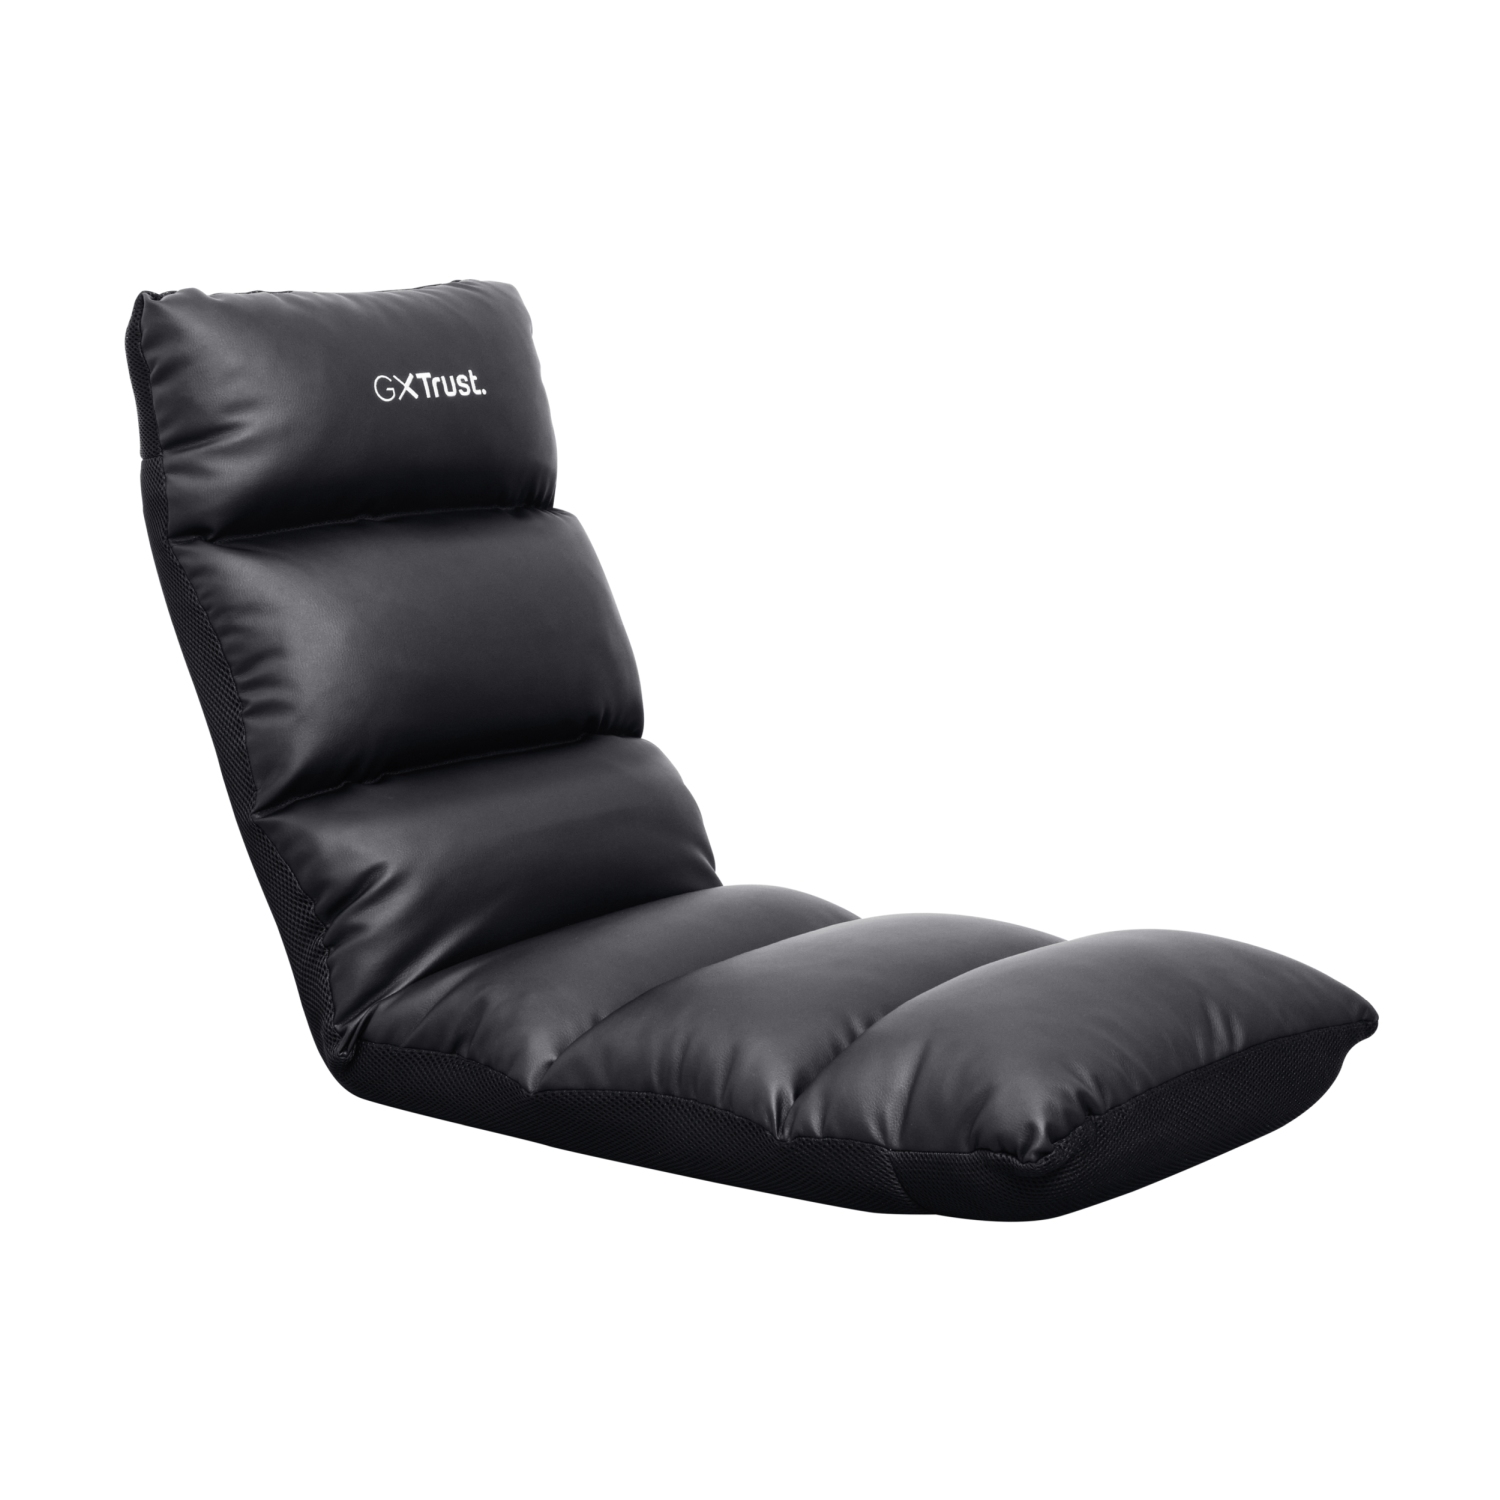 Trust GXT718 RAYZEE GAMING FLOOR CHAIR 25071